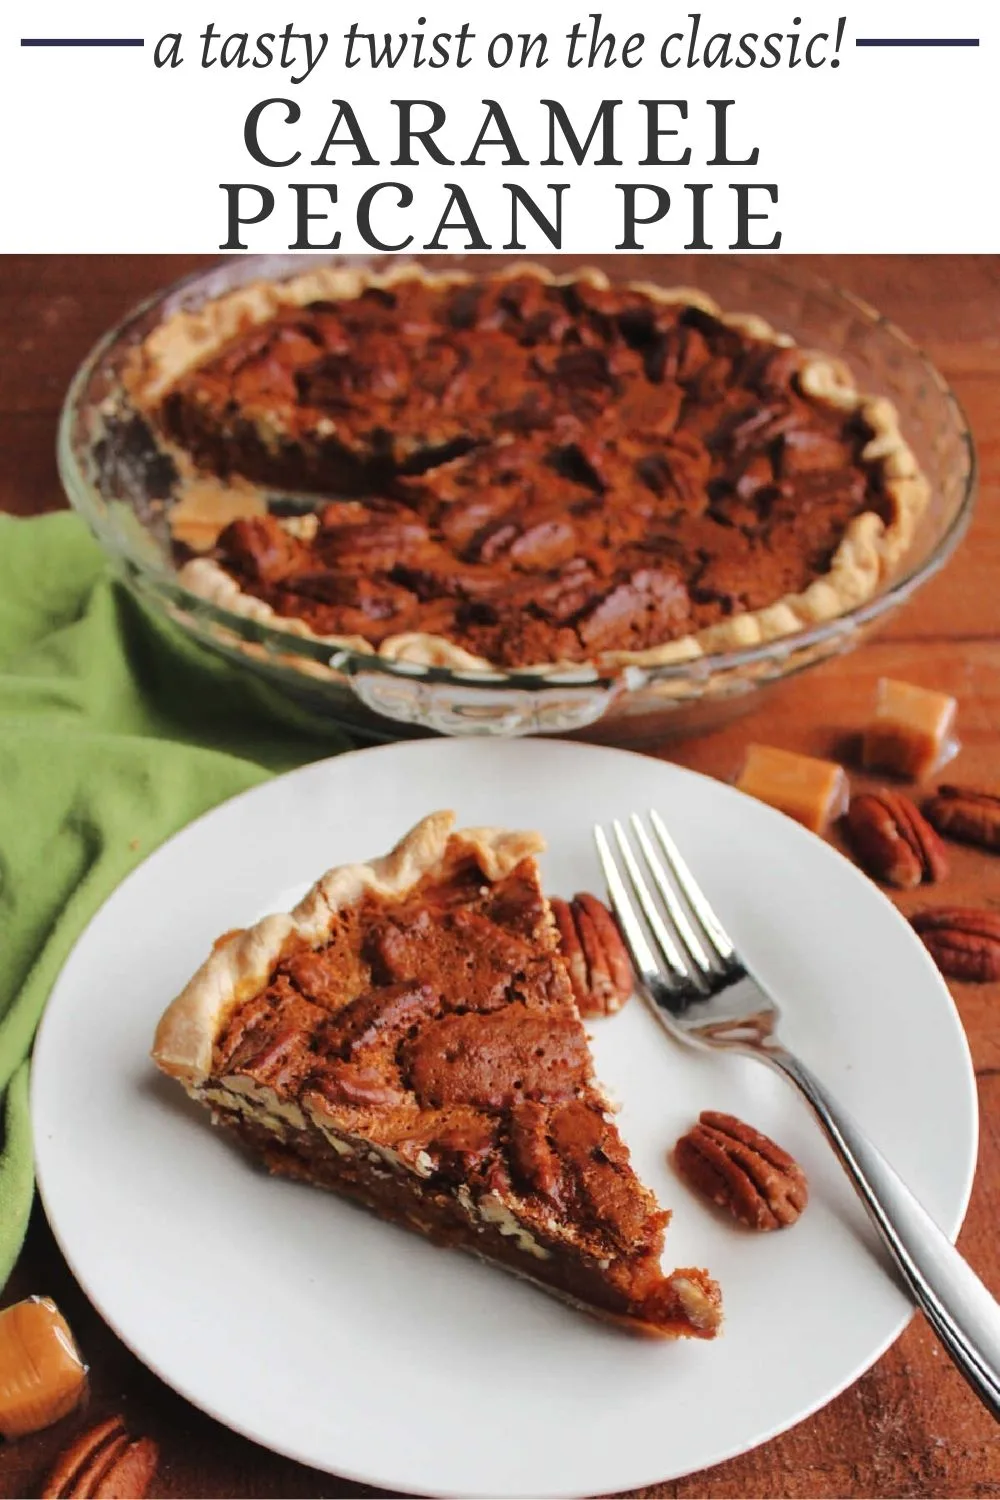 Caramel pecan pie may just become your new favorite pecan pie recipe. The rich gooey caramel accentuates the toasted pecans for an out of this world dessert experience.